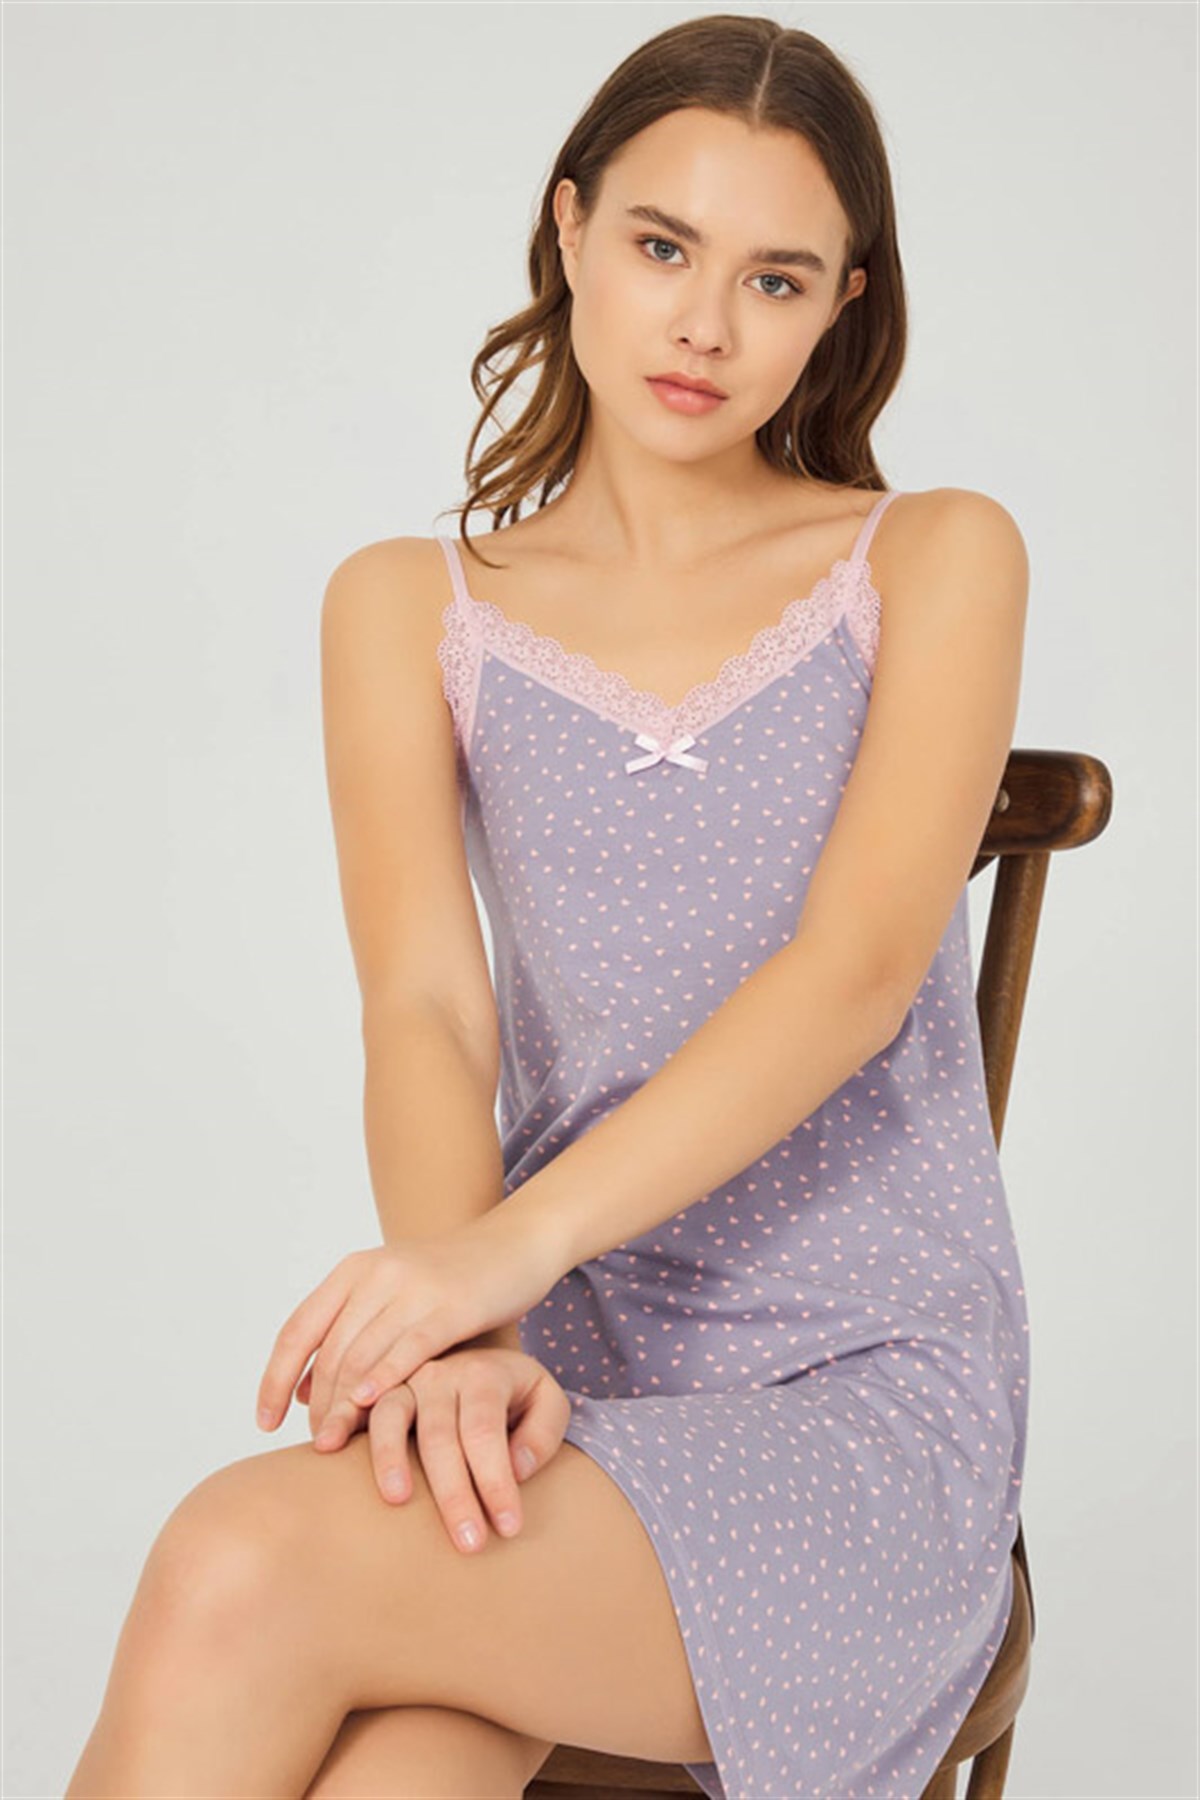 grey-patterned-cotton-nightwear-with-adjustable-strap-ch1406-emp563-1-2